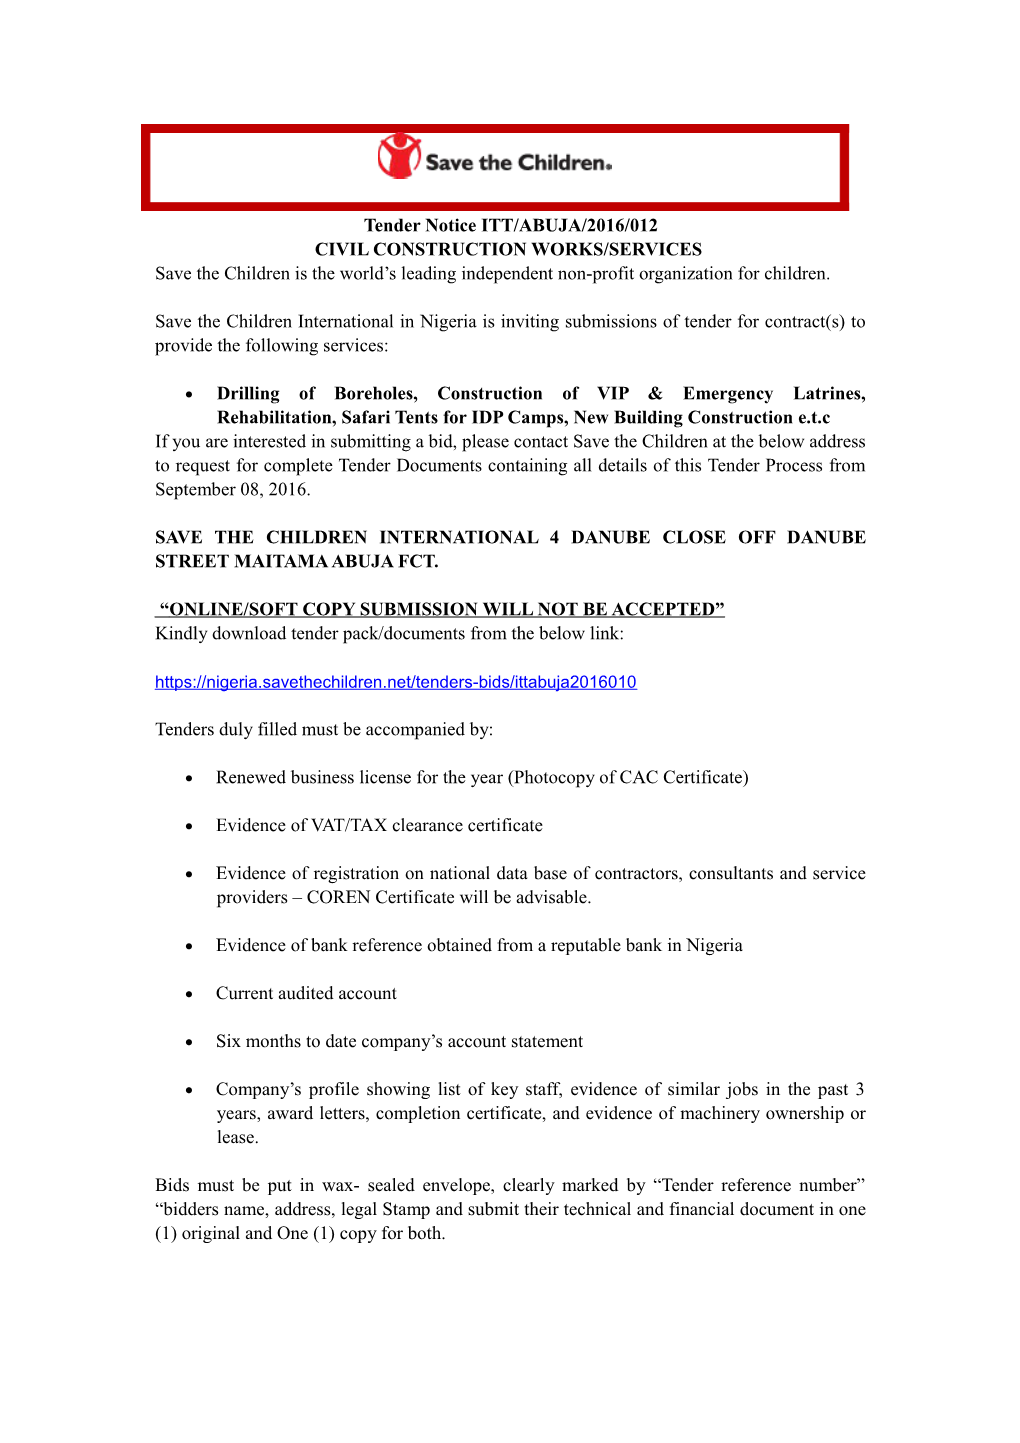 The Save the Children Fund (SCUK) Is Inviting Submissions of Tenders for a Contract To